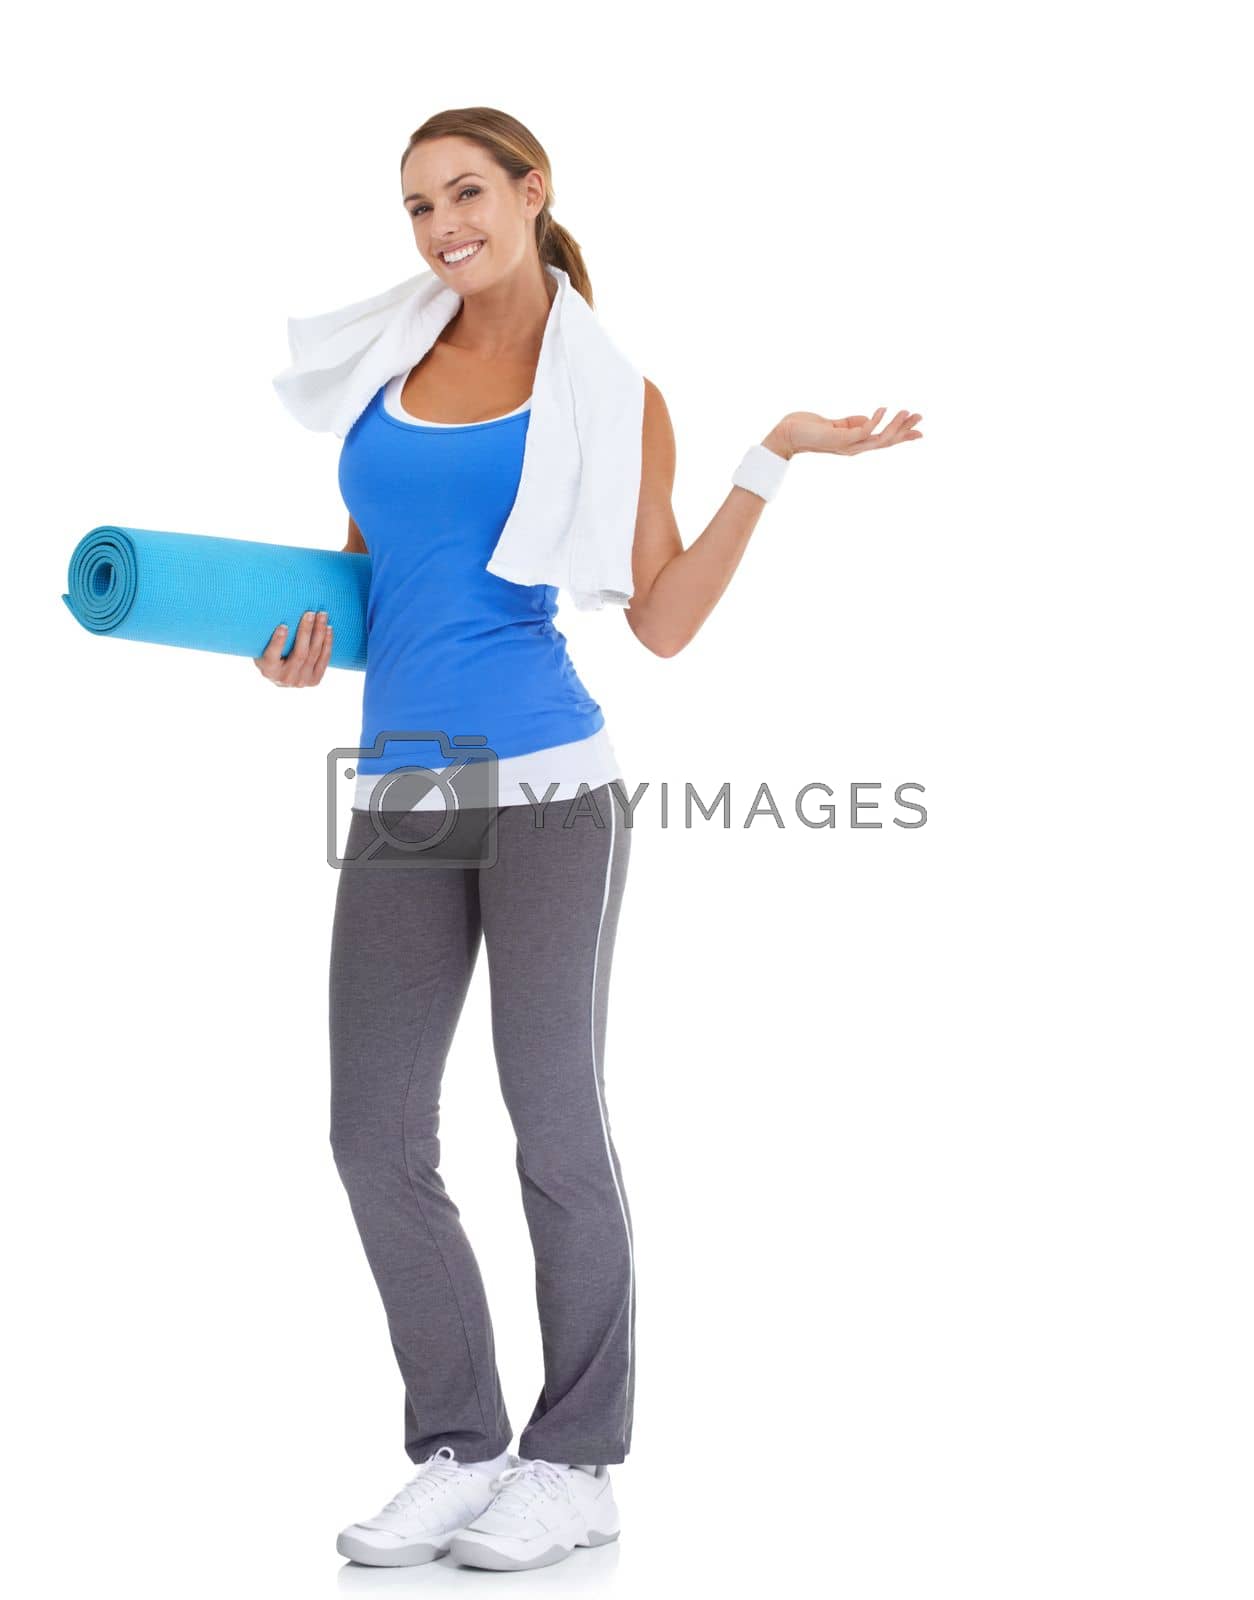 Royalty free image of Suggesting a great fitness option...Fit young woman holding a pilates mat with a smile - isolated on white. by YuriArcurs